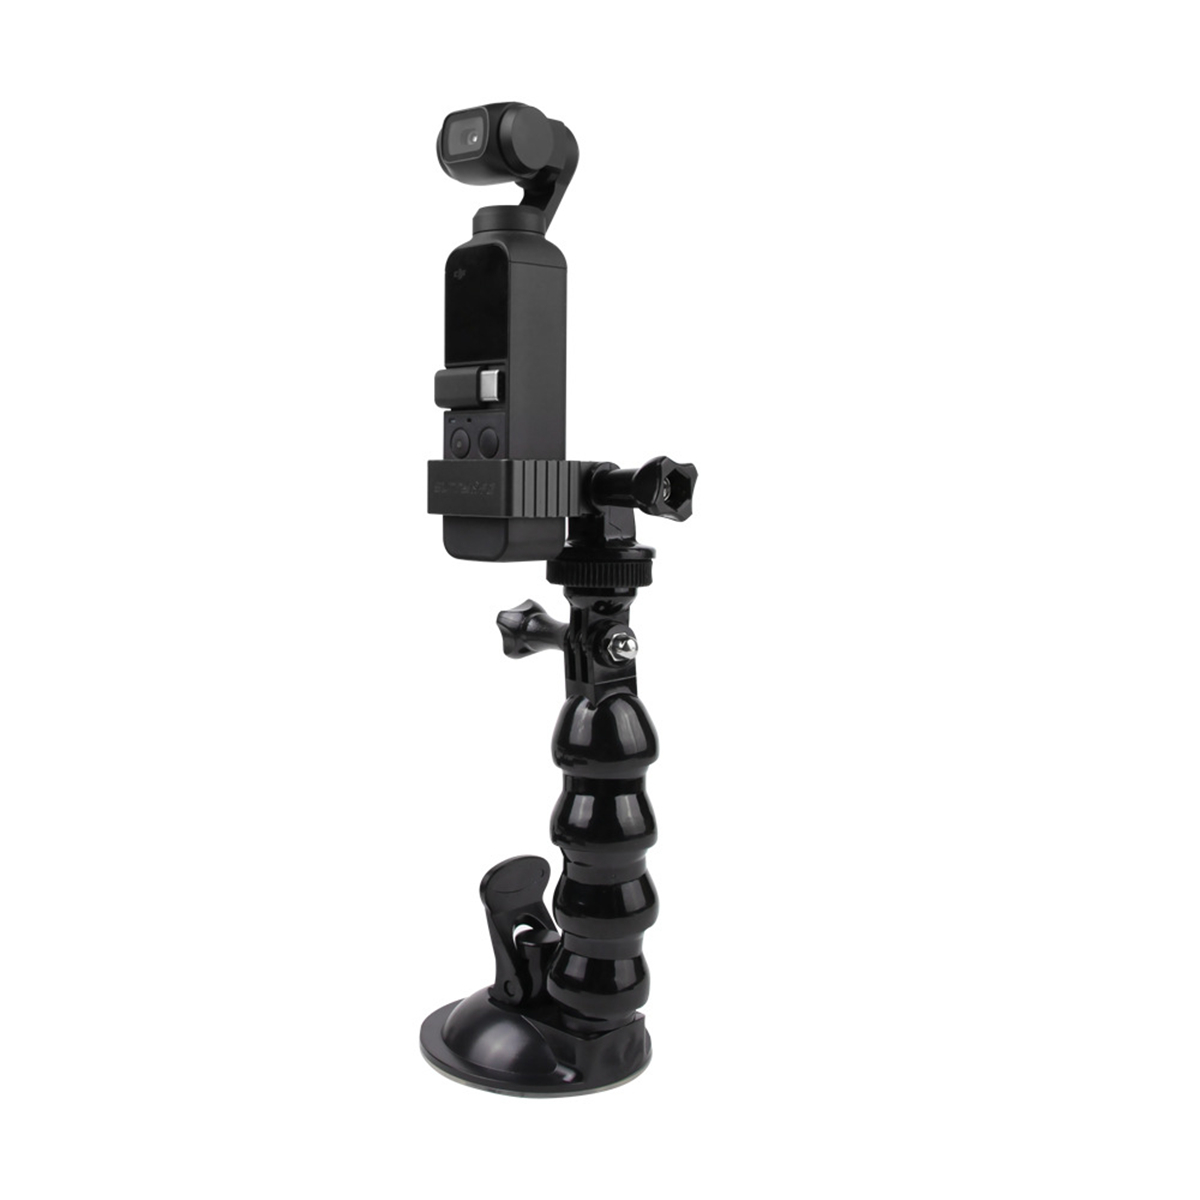 

Flexible Magic Arm Stabilizer Support for DJI OSMO Pocket Gimbal Action Camera